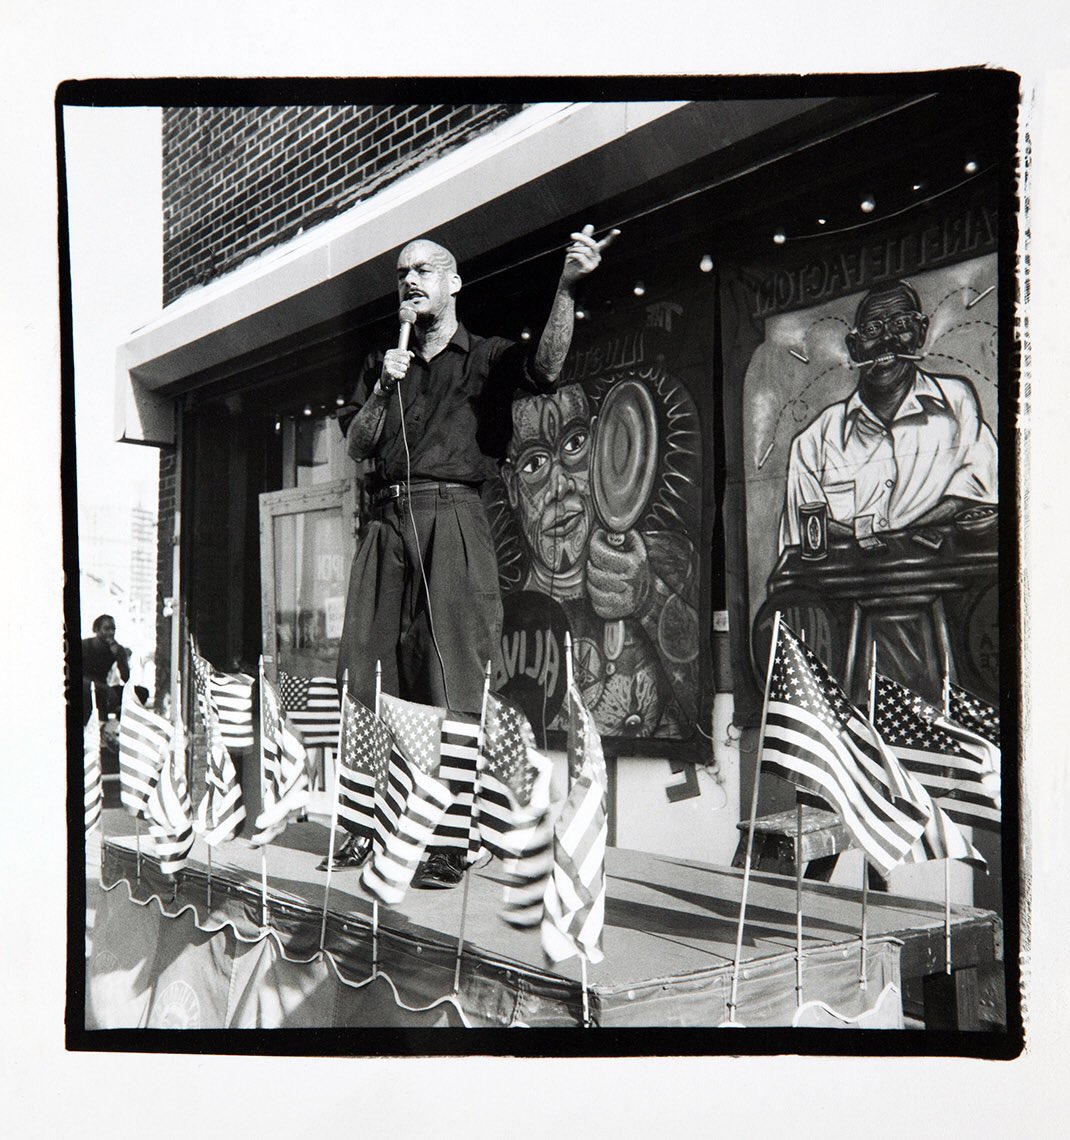 Happy 4th of July!!!!

Michael Wilson on the bally stage by sword swallower and photographic genius Lady Diane Falk - tattoomikefilm.com #tattoomikefilm #coneyisland #beach #circus #sideshow #freak #documentary #film #holiday #4thofjuly #underground #lgbt #diabetes #live